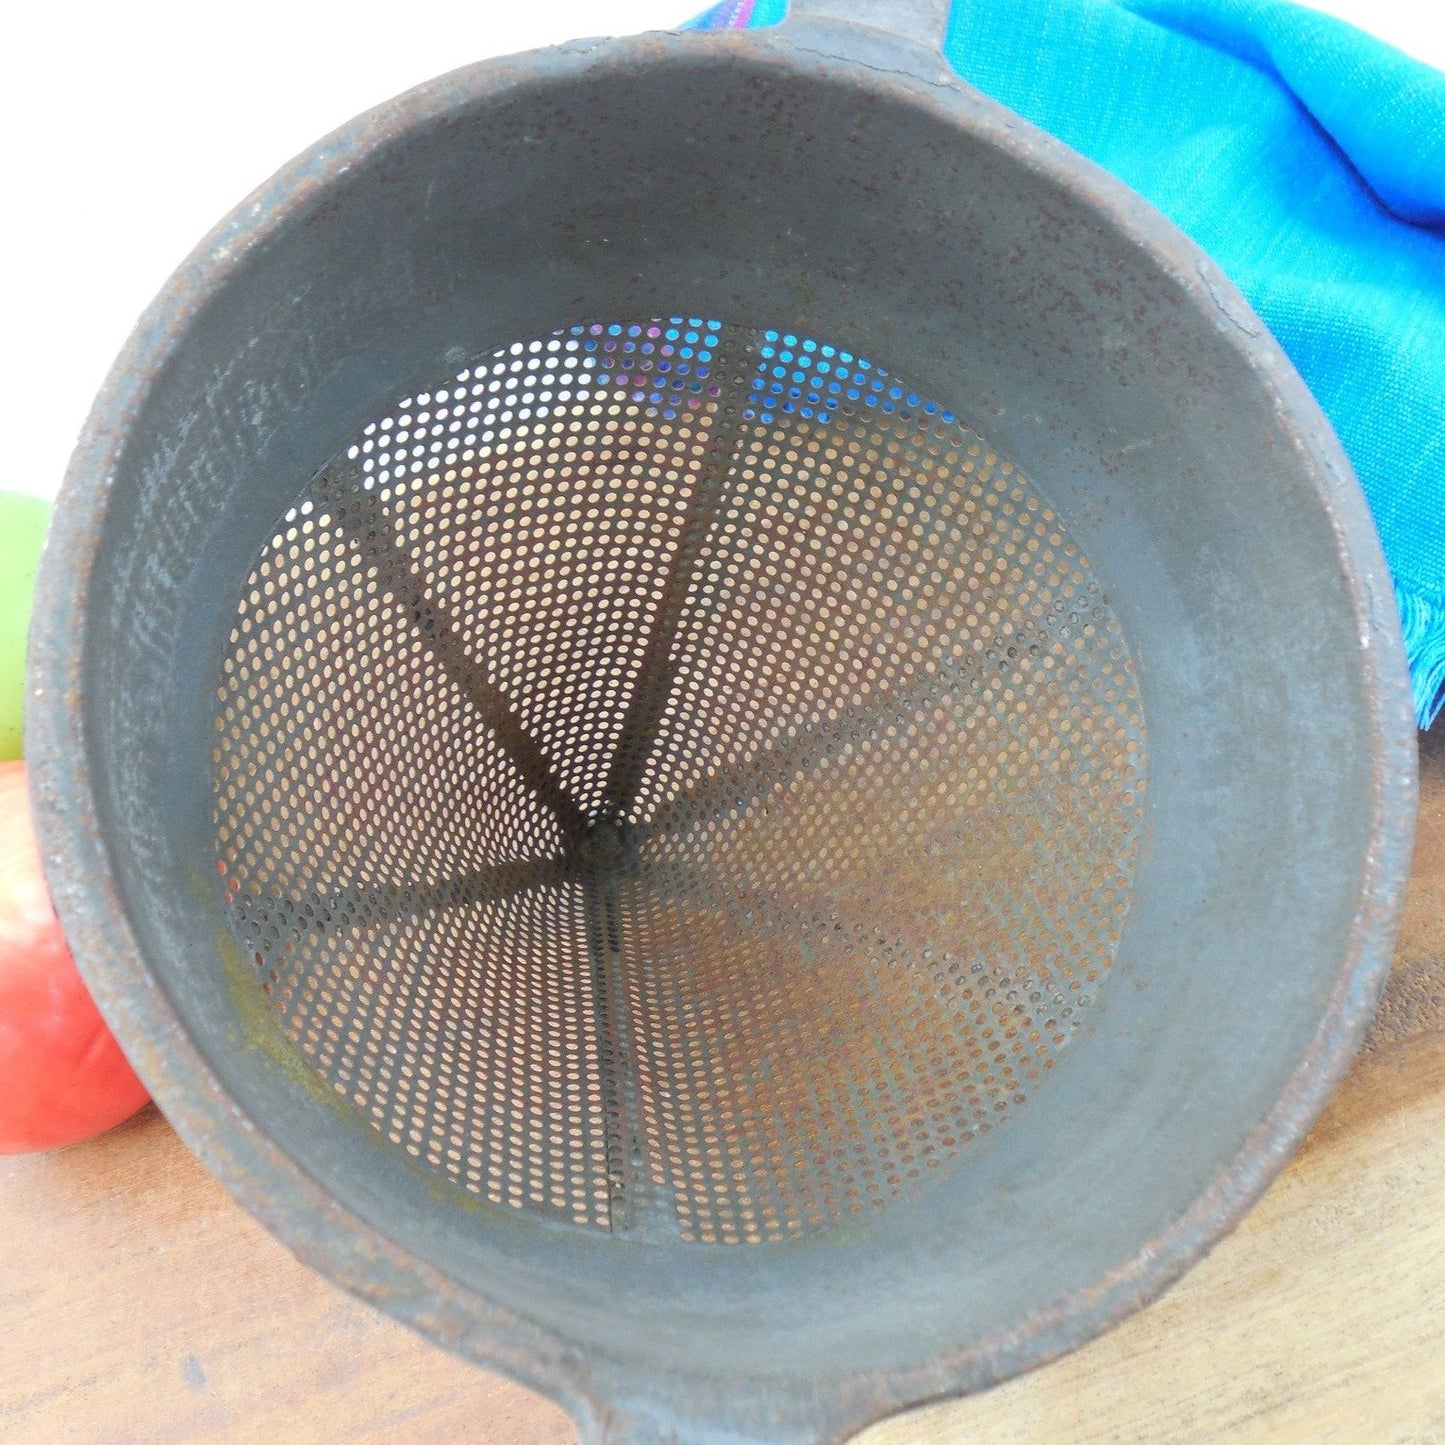 Antique Cast Iron Steel Food Cone Sieve Mill Ricer - Rustic Farm Shabby Industrial Decor... surface rust